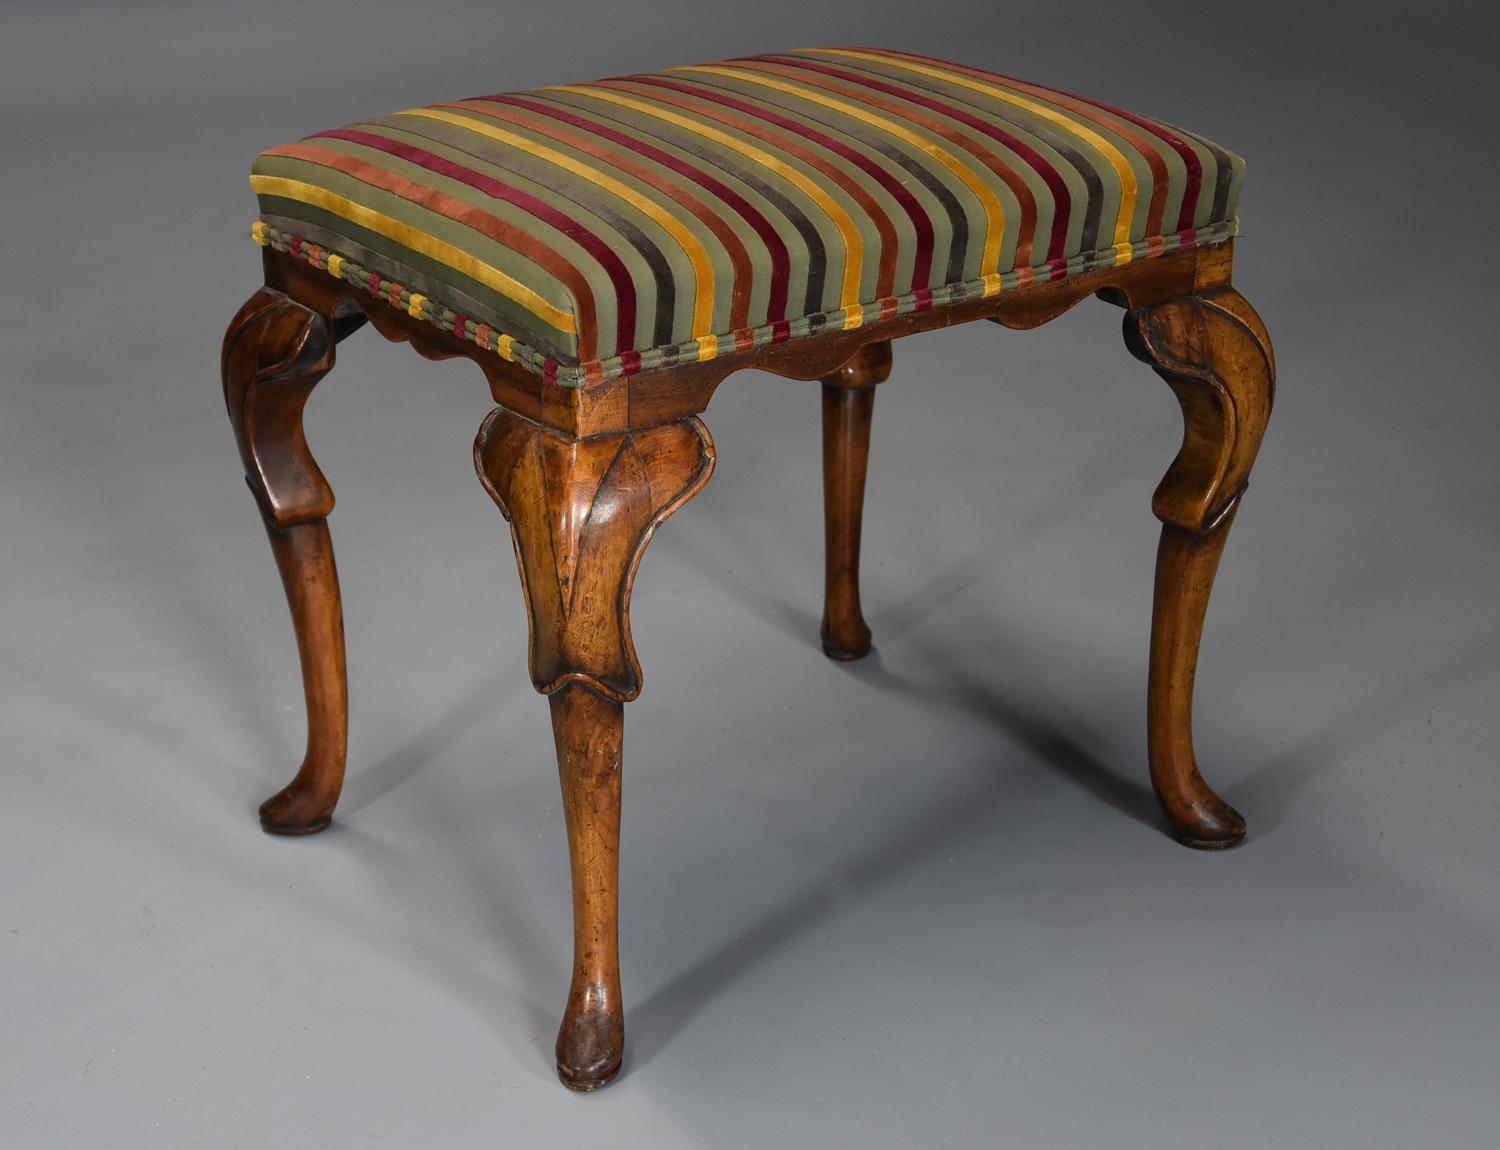 Early 20th century walnut cabriole leg stool in the Queen Anne style